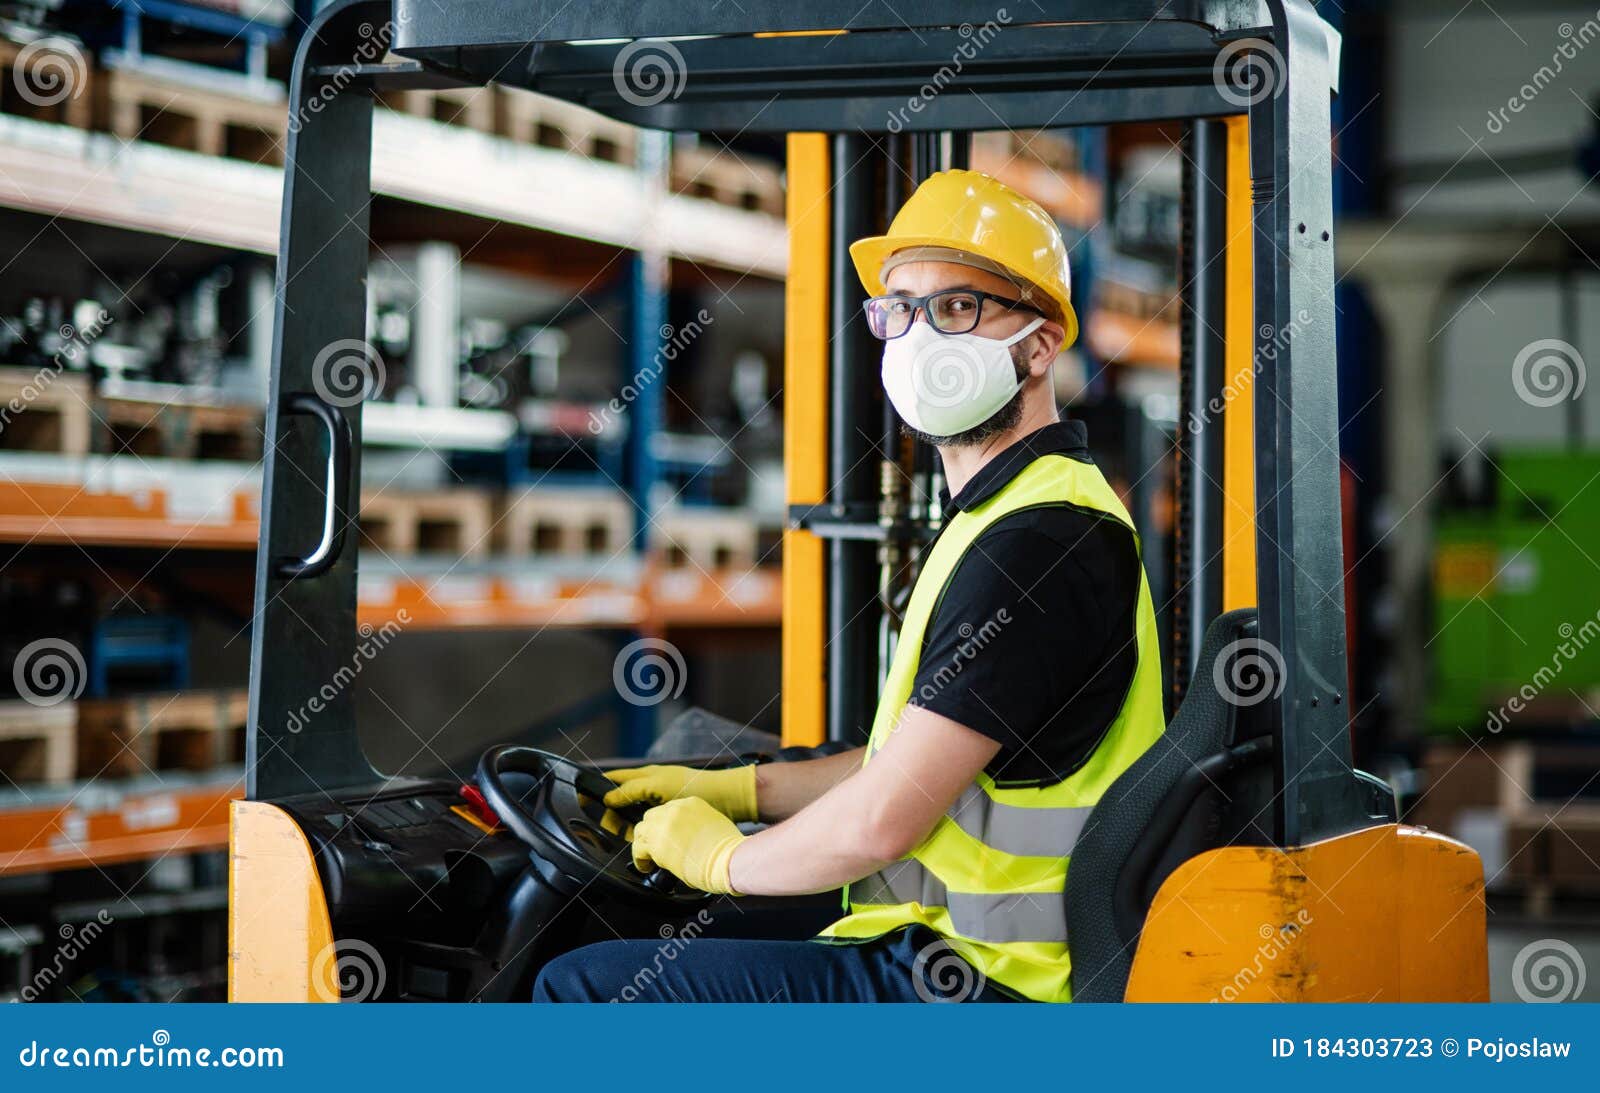 Man Worker Forklift Driver With Protective Mask Working In Industrial Factory Or Warehouse Stock Image Image Of Face Mature 184303723